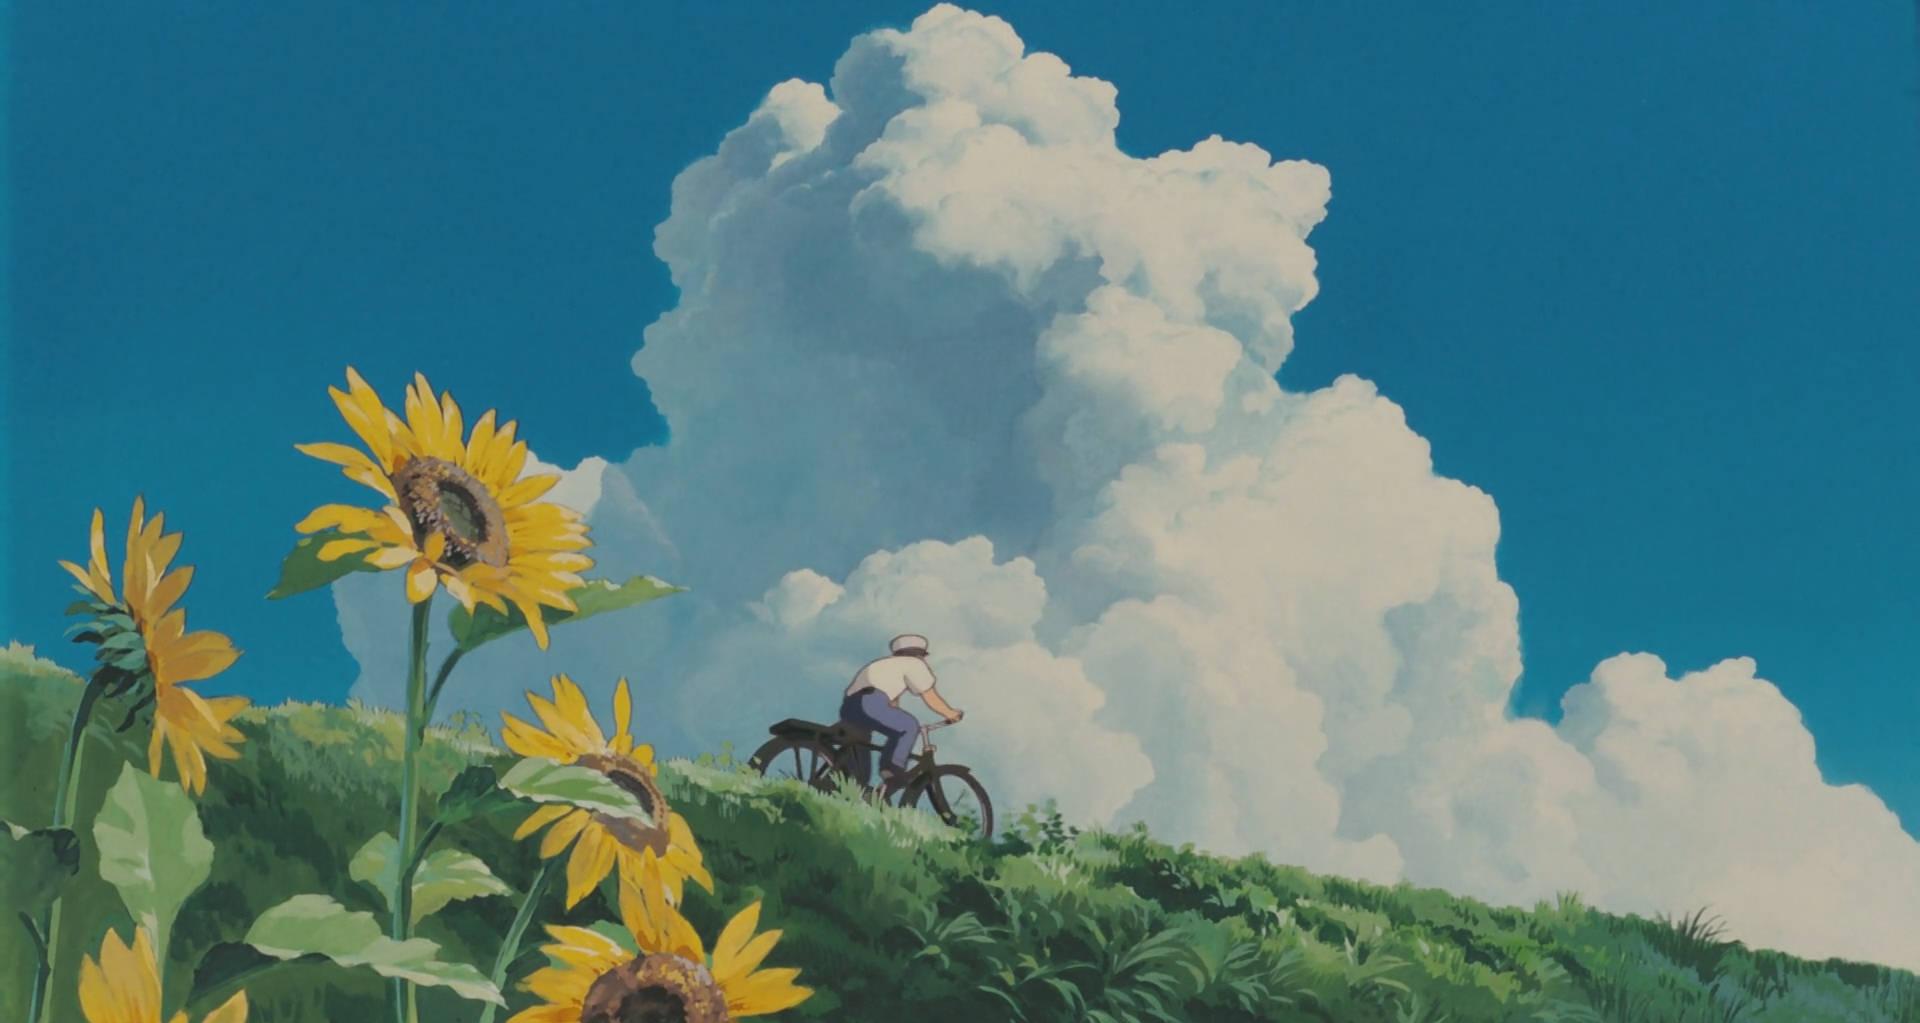 Tranquil Studio Ghibli Scenery With Blooming Sunflowers